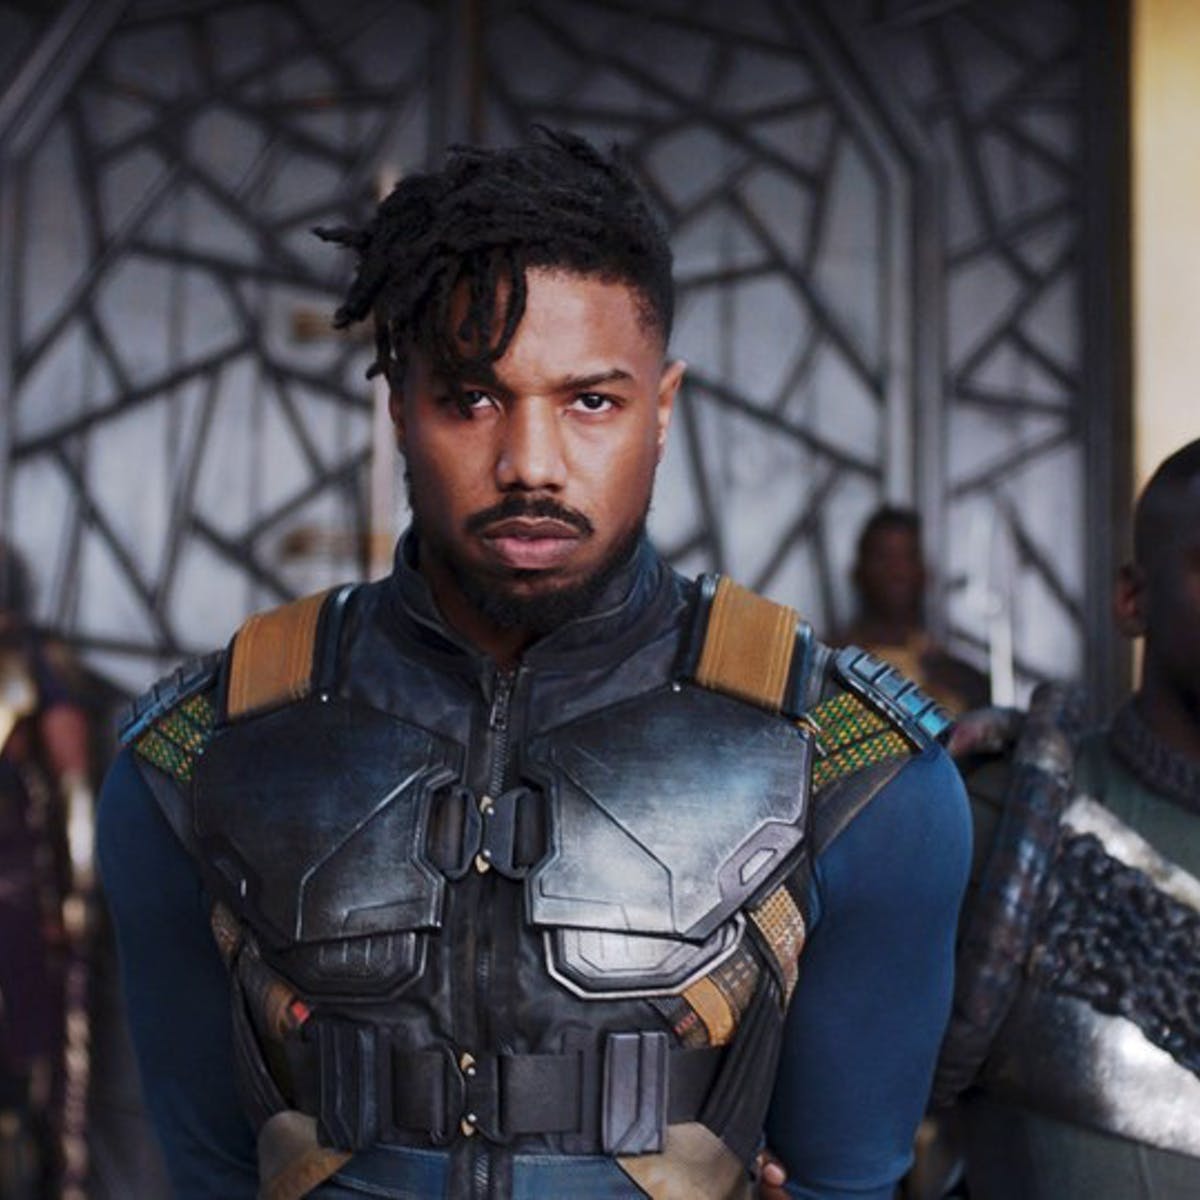 Black Panther' villain can teach us about revolutionary history